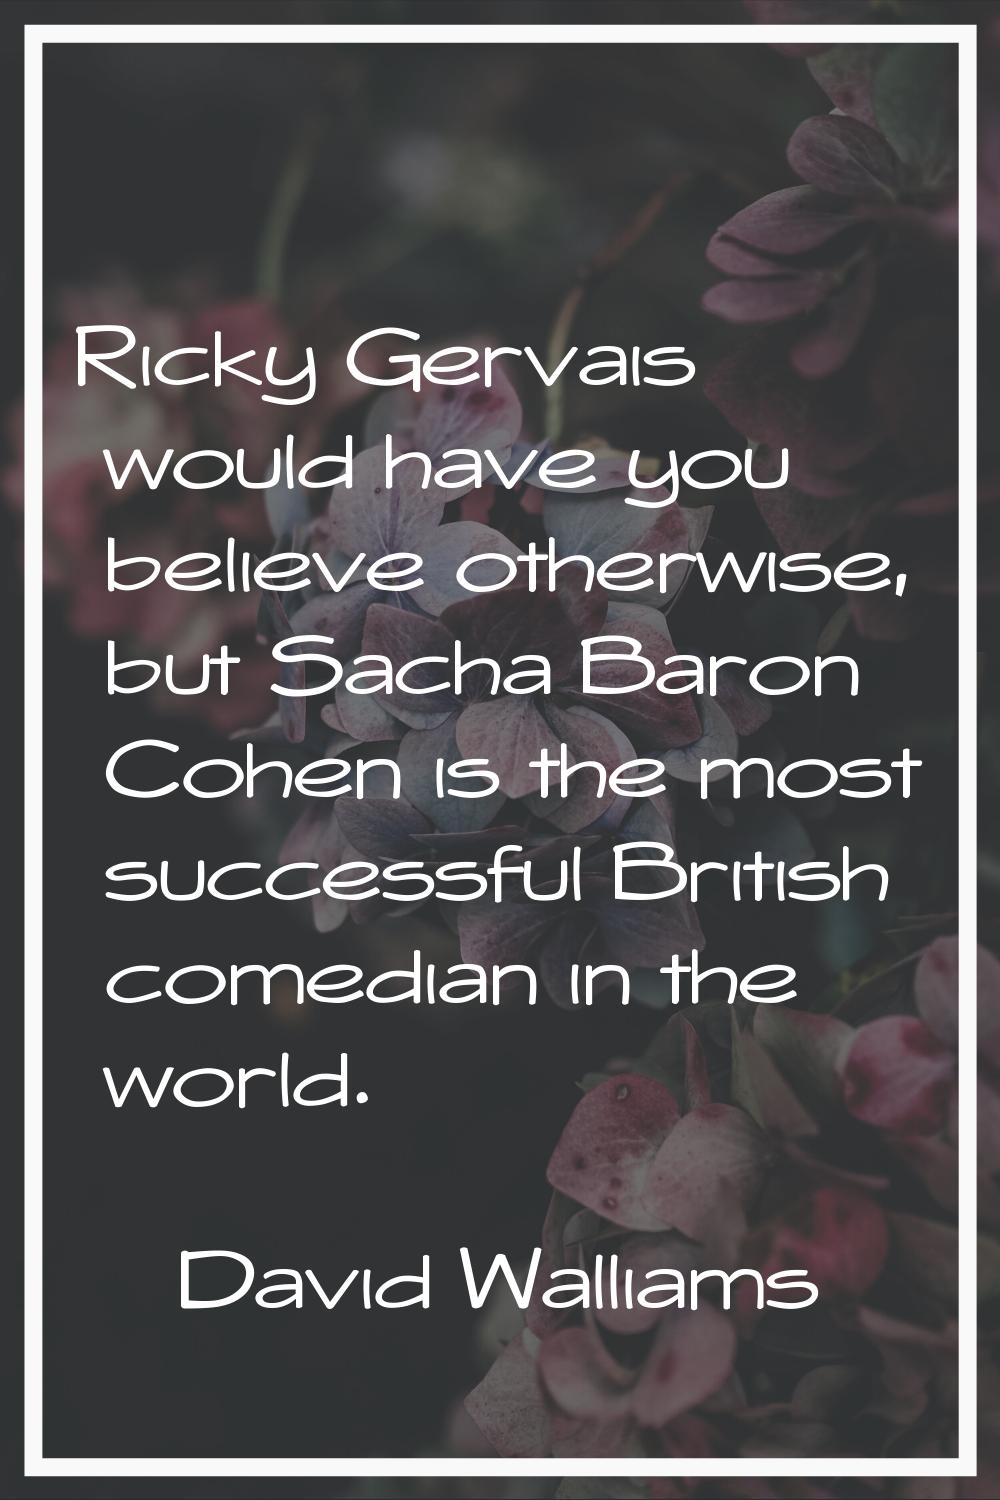 Ricky Gervais would have you believe otherwise, but Sacha Baron Cohen is the most successful Britis